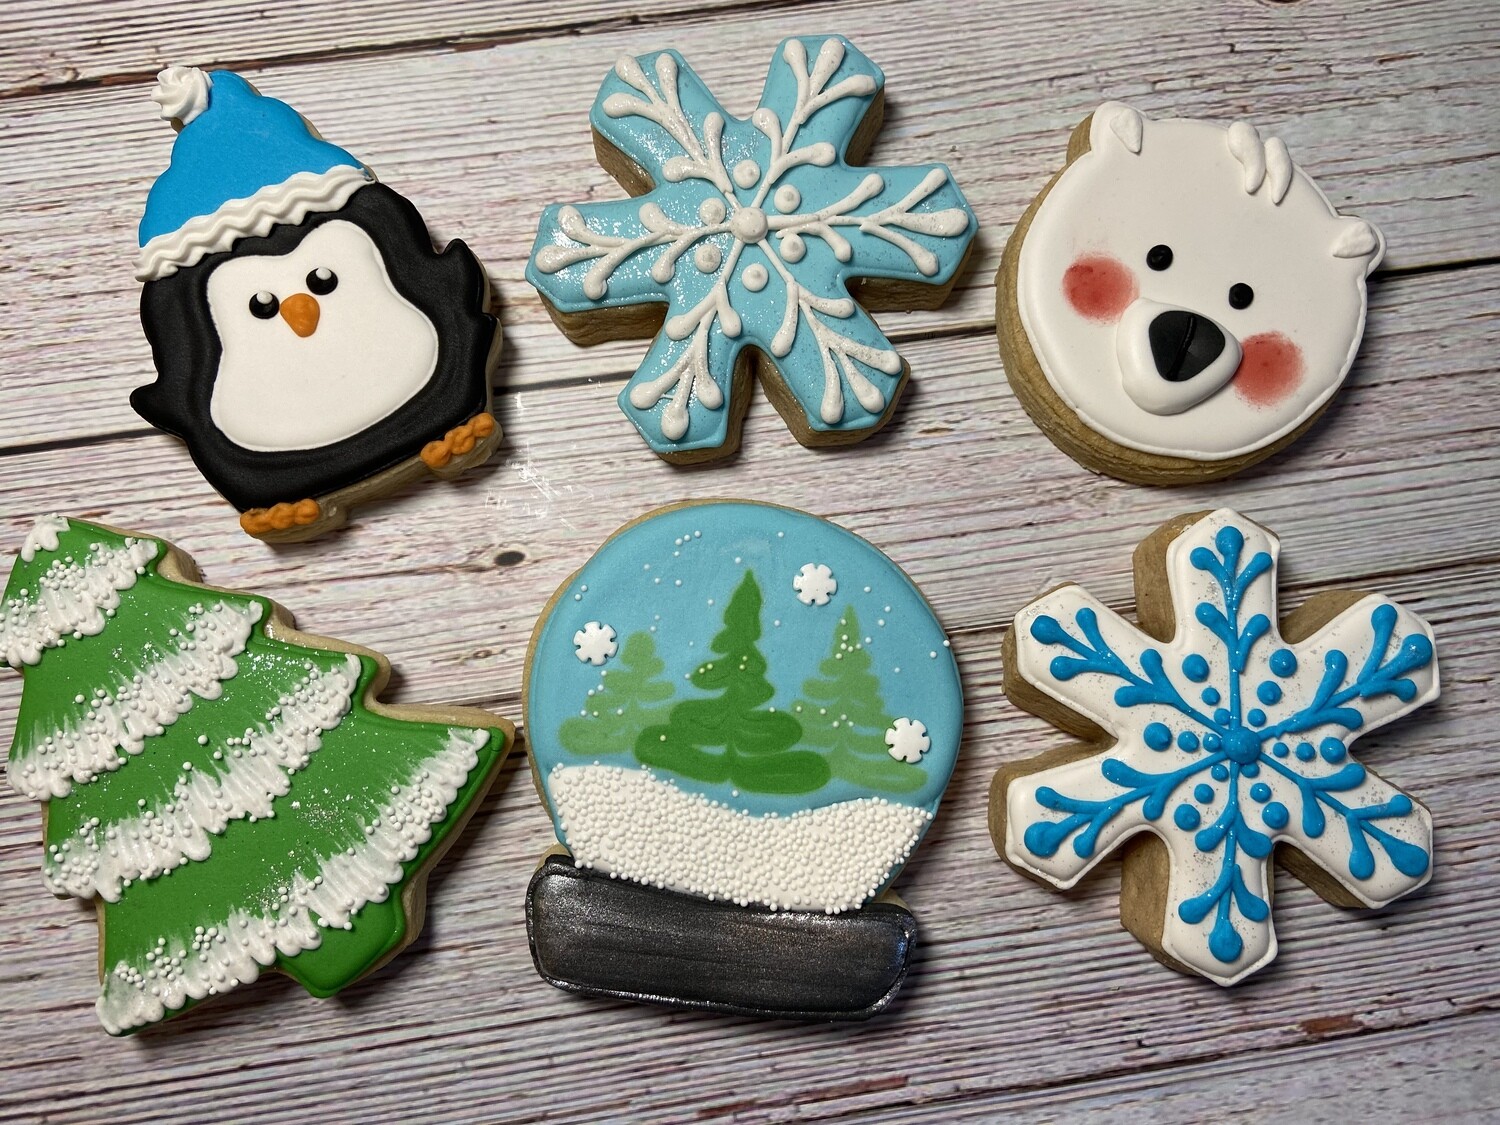 'Snow Globe' Decorating Workshop - FRIDAY, JANUARY 24th at 6:30 p.m. (THE COOKIE DECORATING STUDIO)